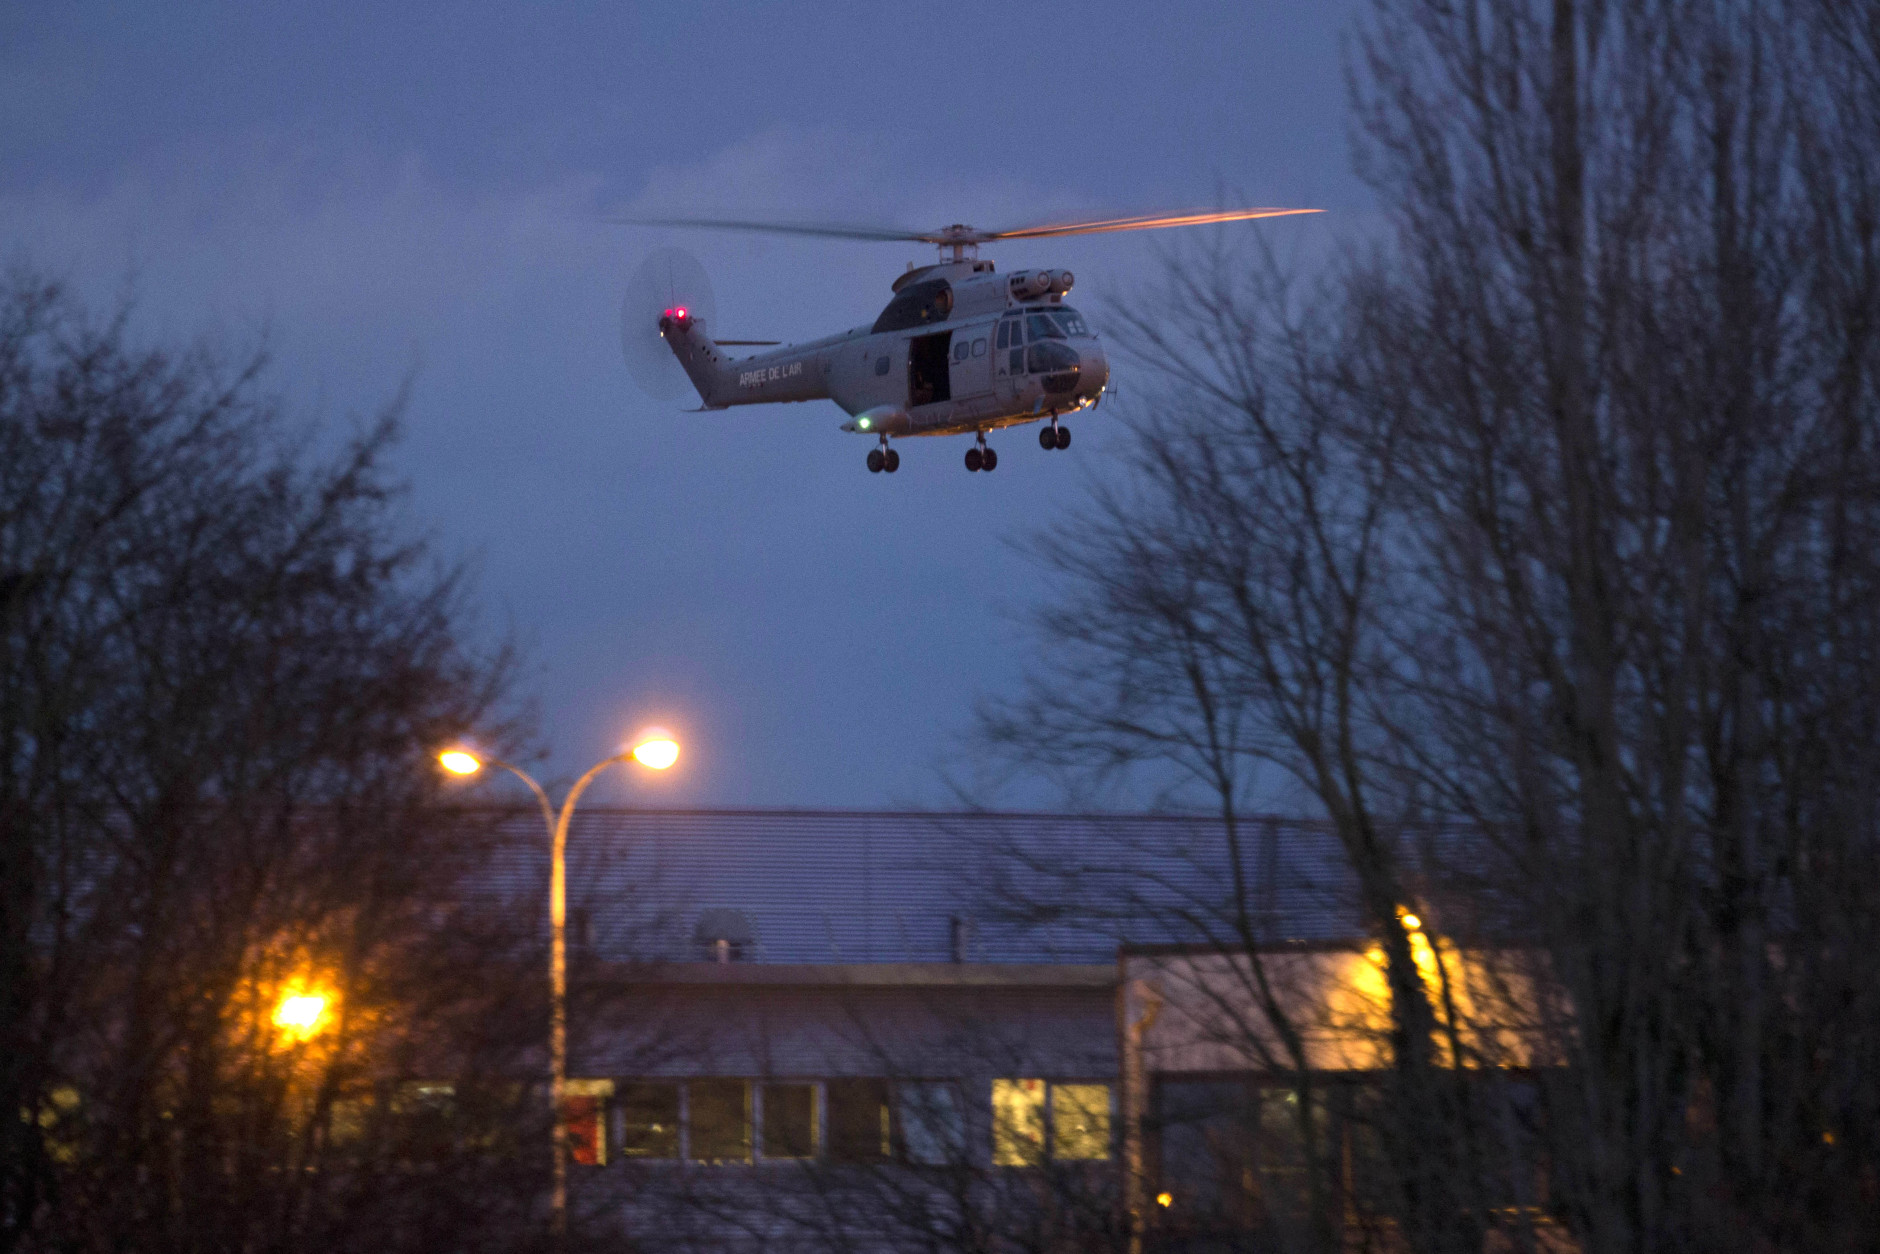 A helicopter flies over a building, where the suspects of a shooting at a Paris newspaper office were holed up, after security forces stormed it in Dammartin-en-Goele, France, Friday Jan. 9, 2015. French police stormed a printing plant north of Paris on Friday, freeing a hostage and killing two brothers linked to al-Qaida who were suspected of slaying 12 people at a Paris newspaper two days ago. (AP Photo/Peter Dejong)